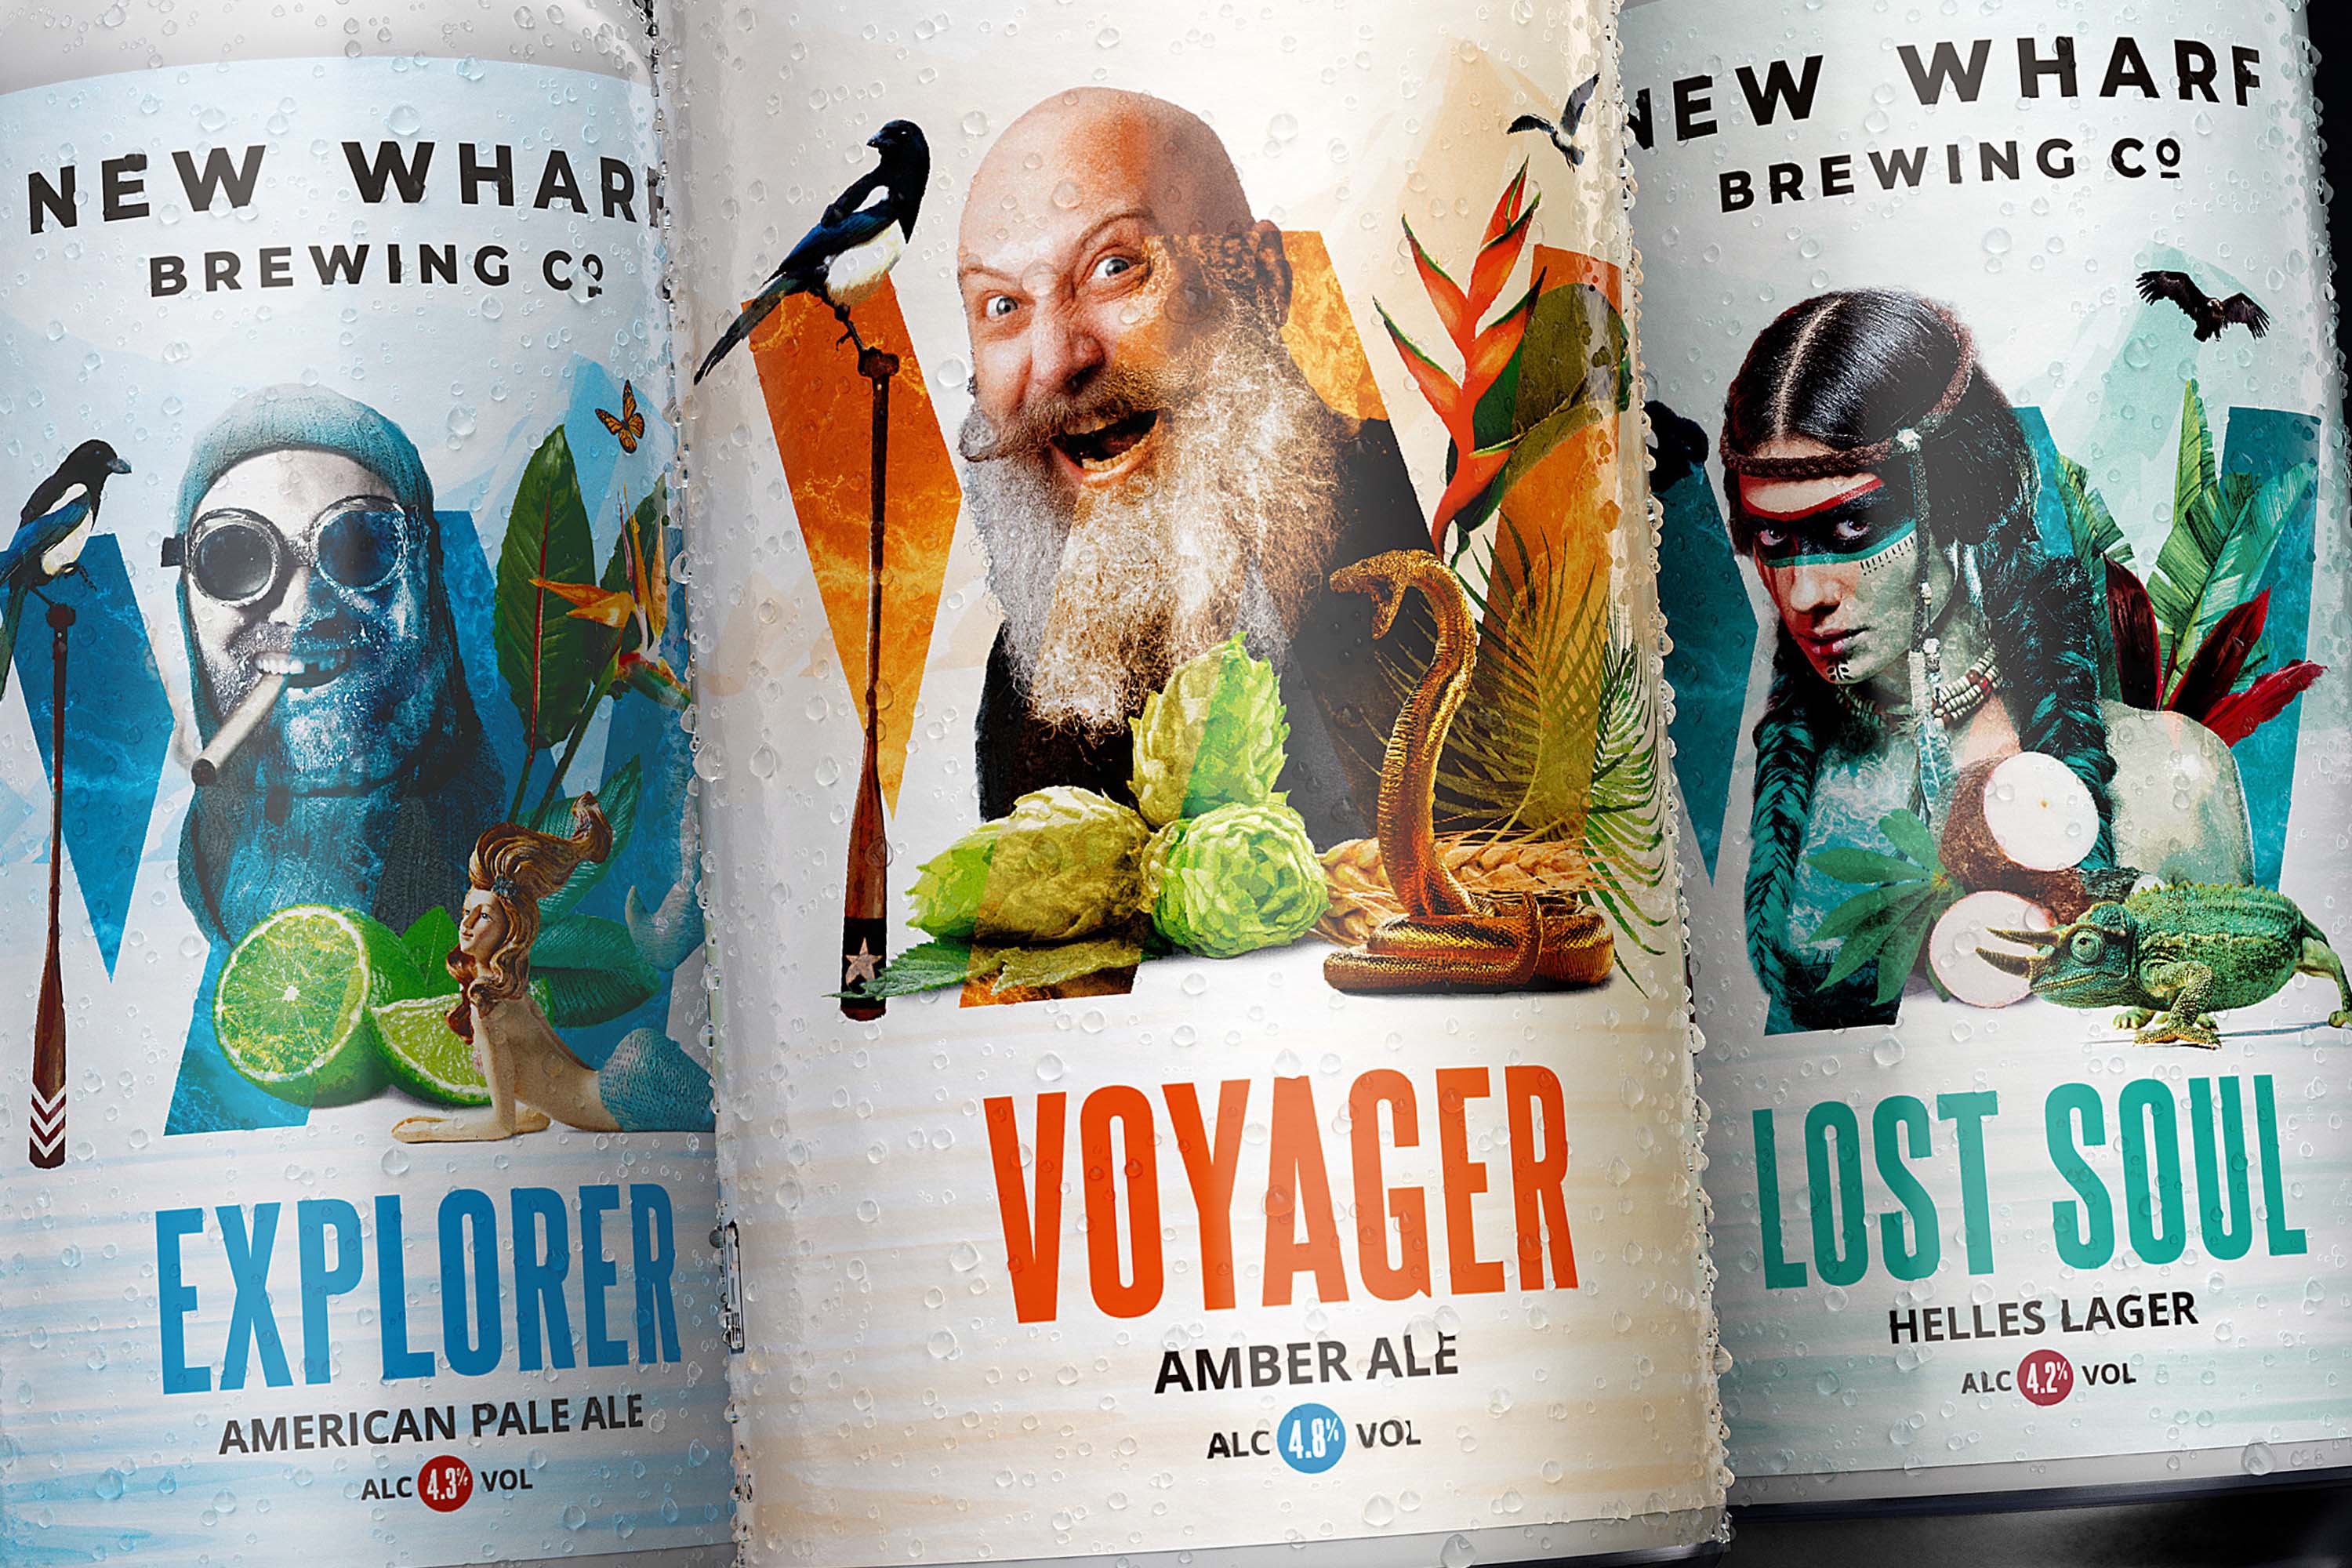 New Wharf Brewing Co. Rebrand and Packaging Design